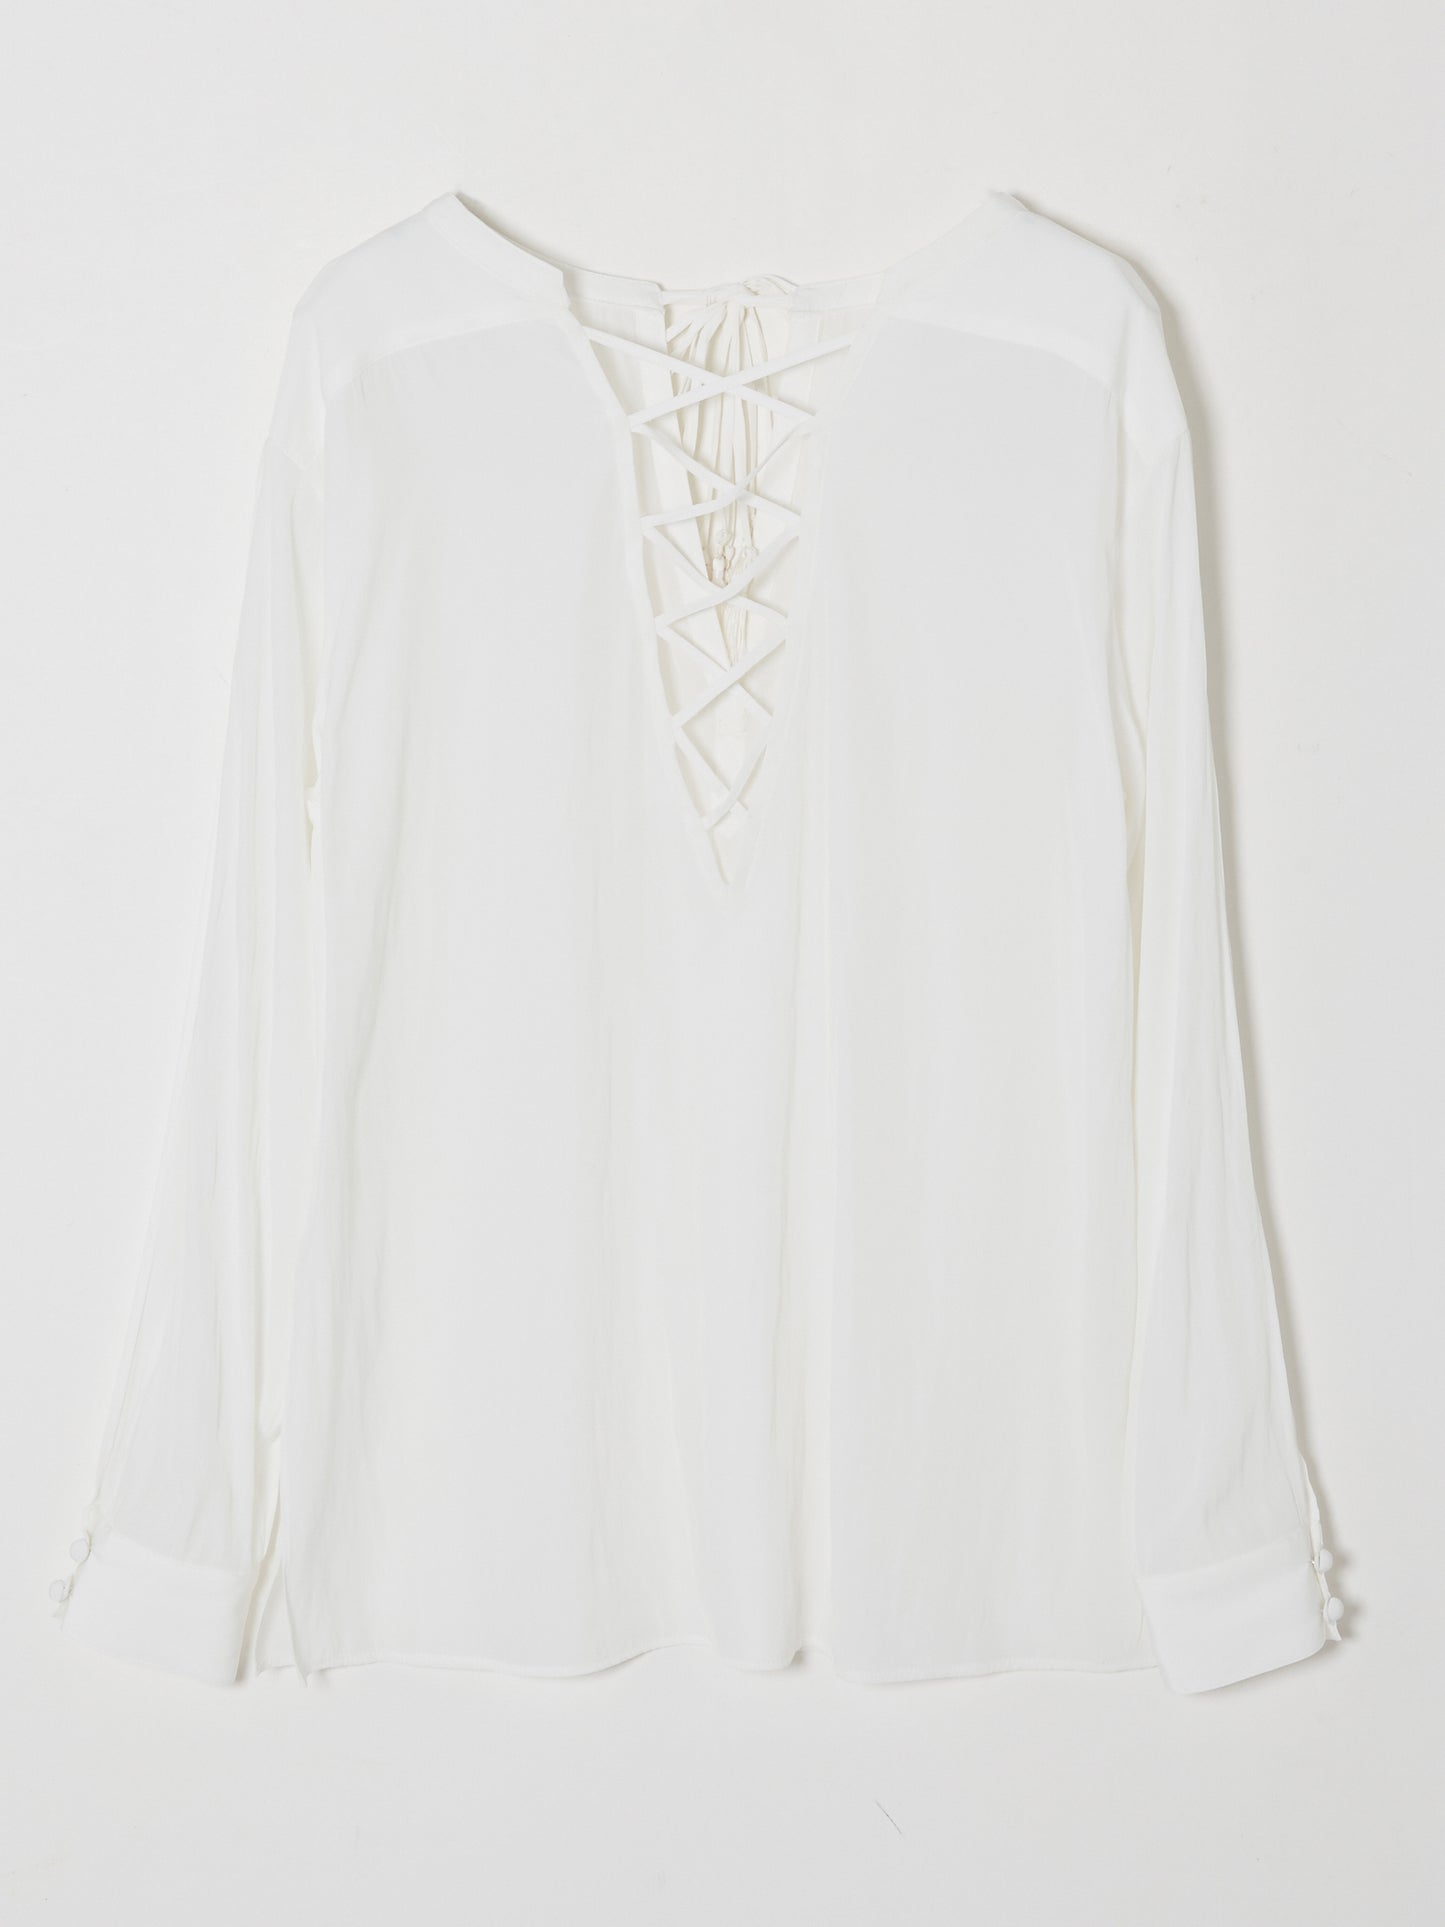 2way tassel blouse【Delivery in December 2023】